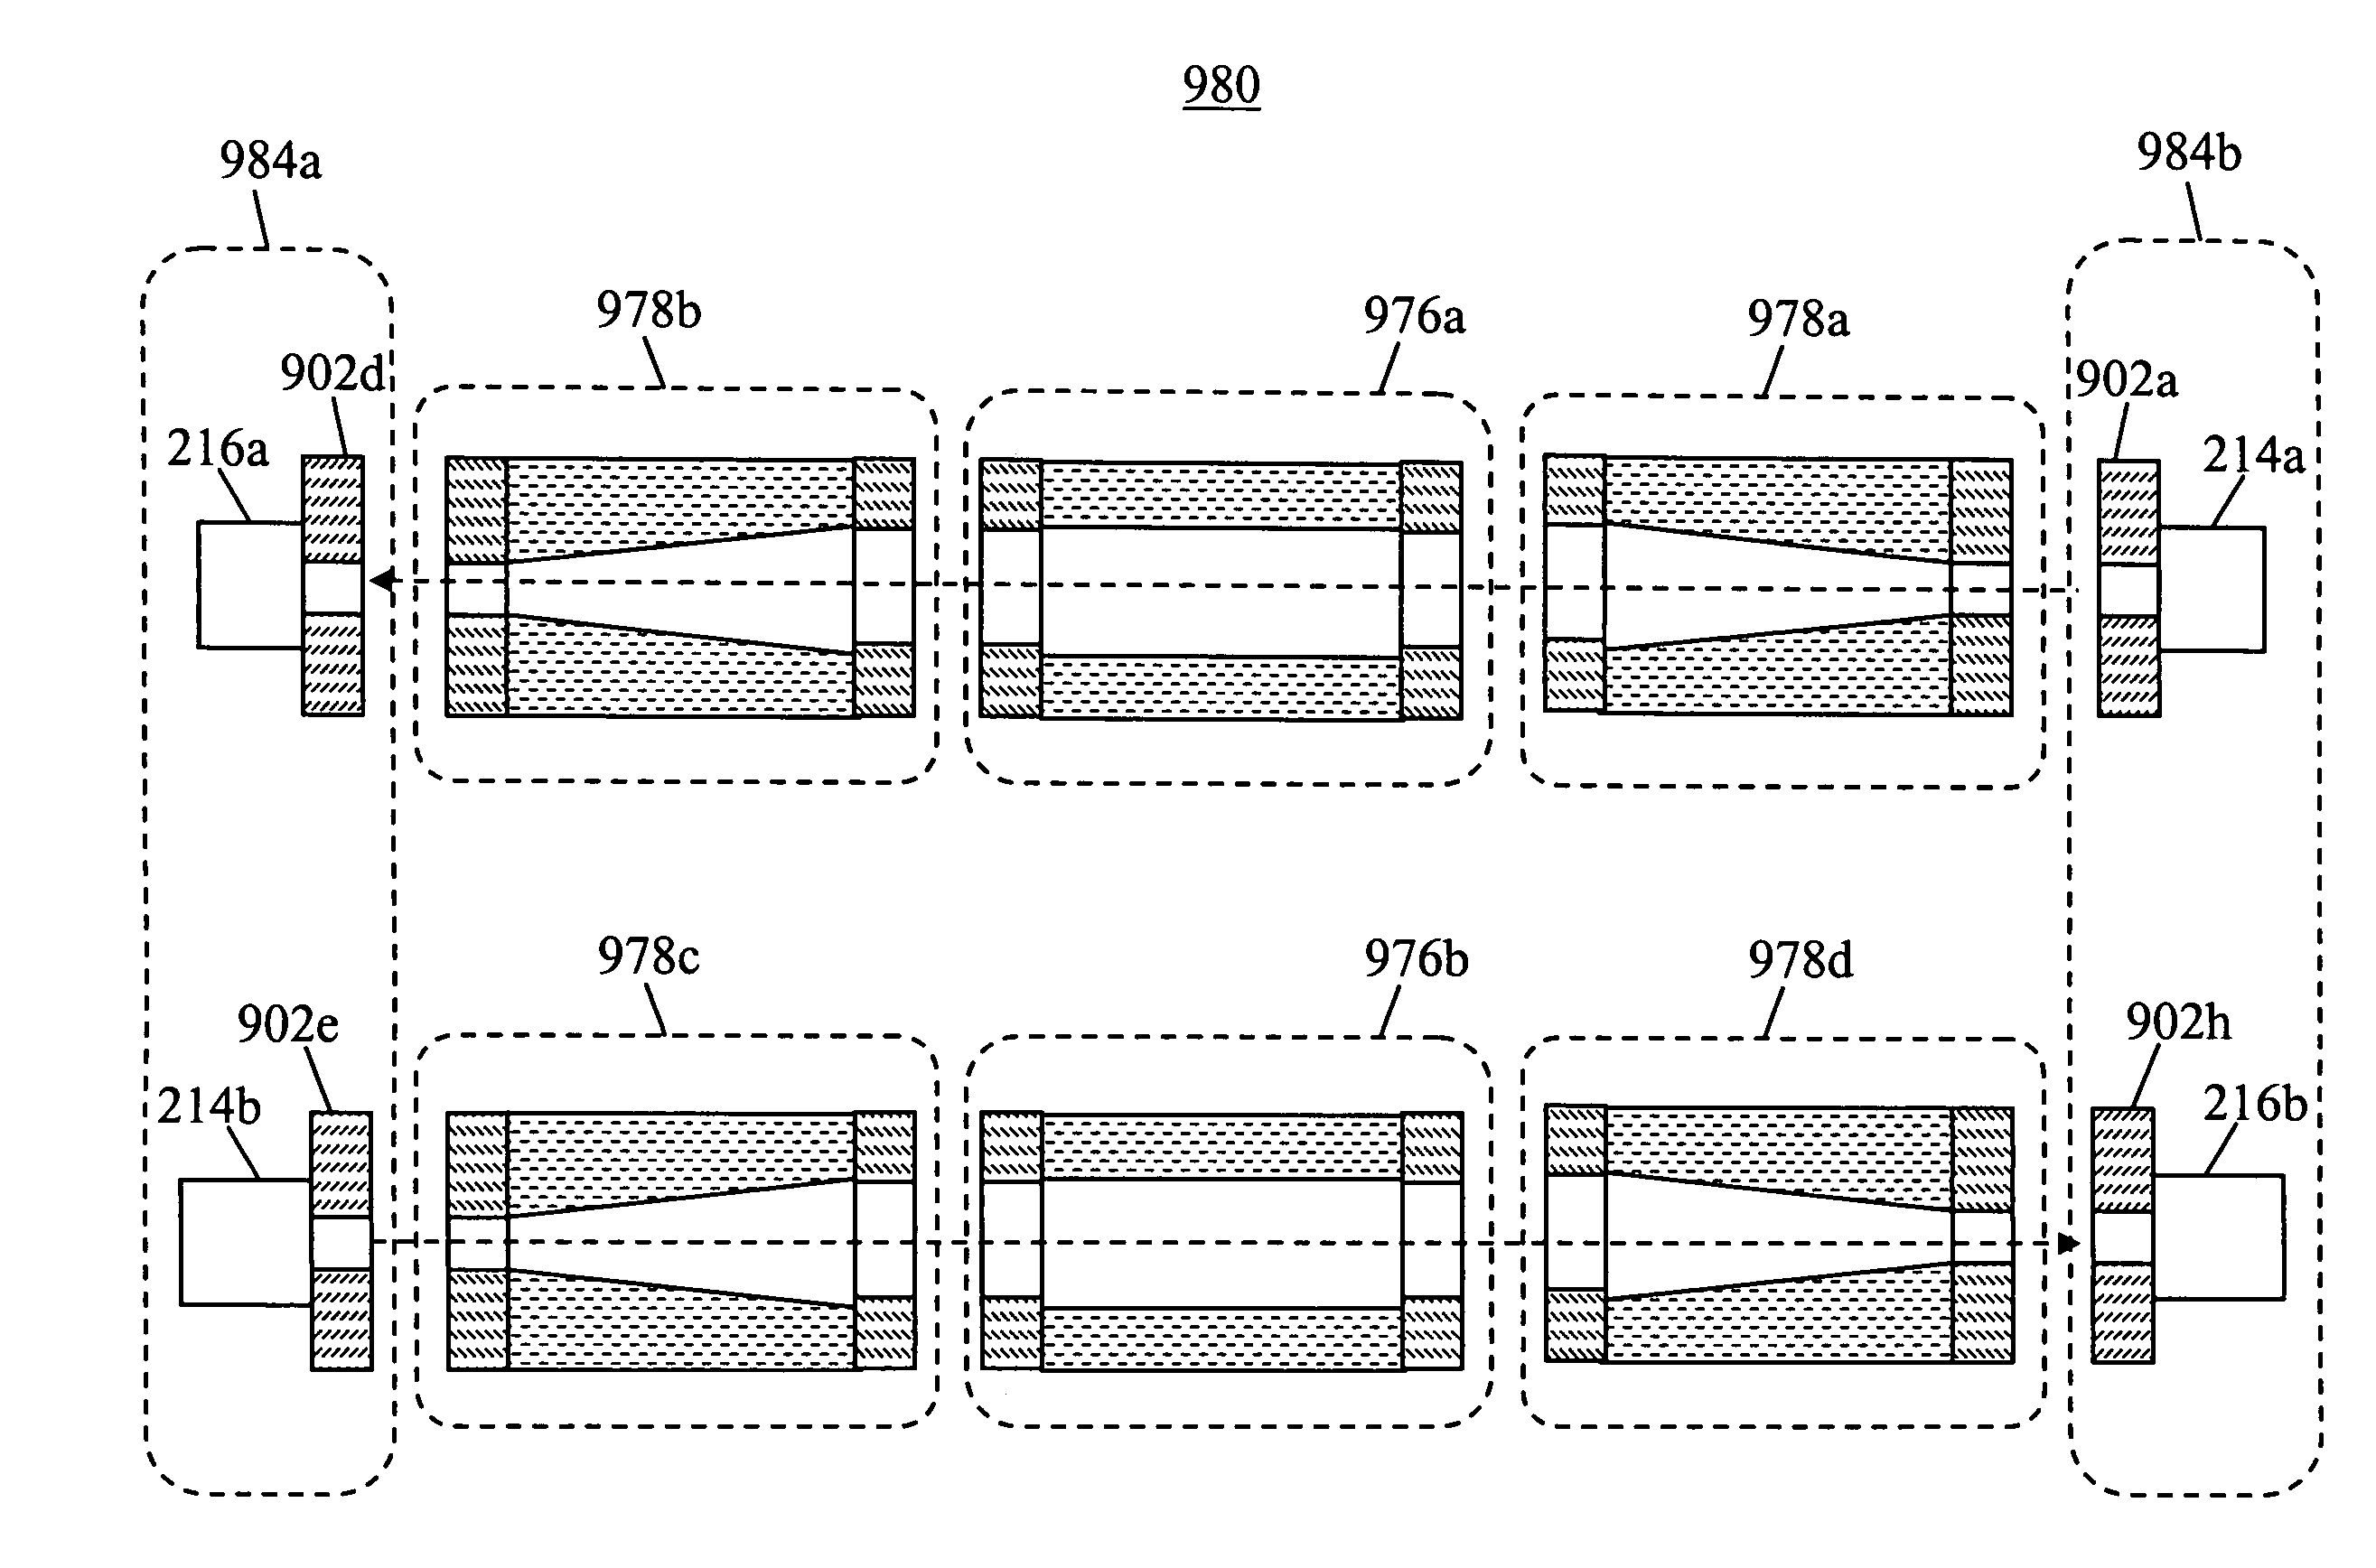 Apparatus, system and method for an adiabatic coupler for multi-mode fiber-optic transmission systems